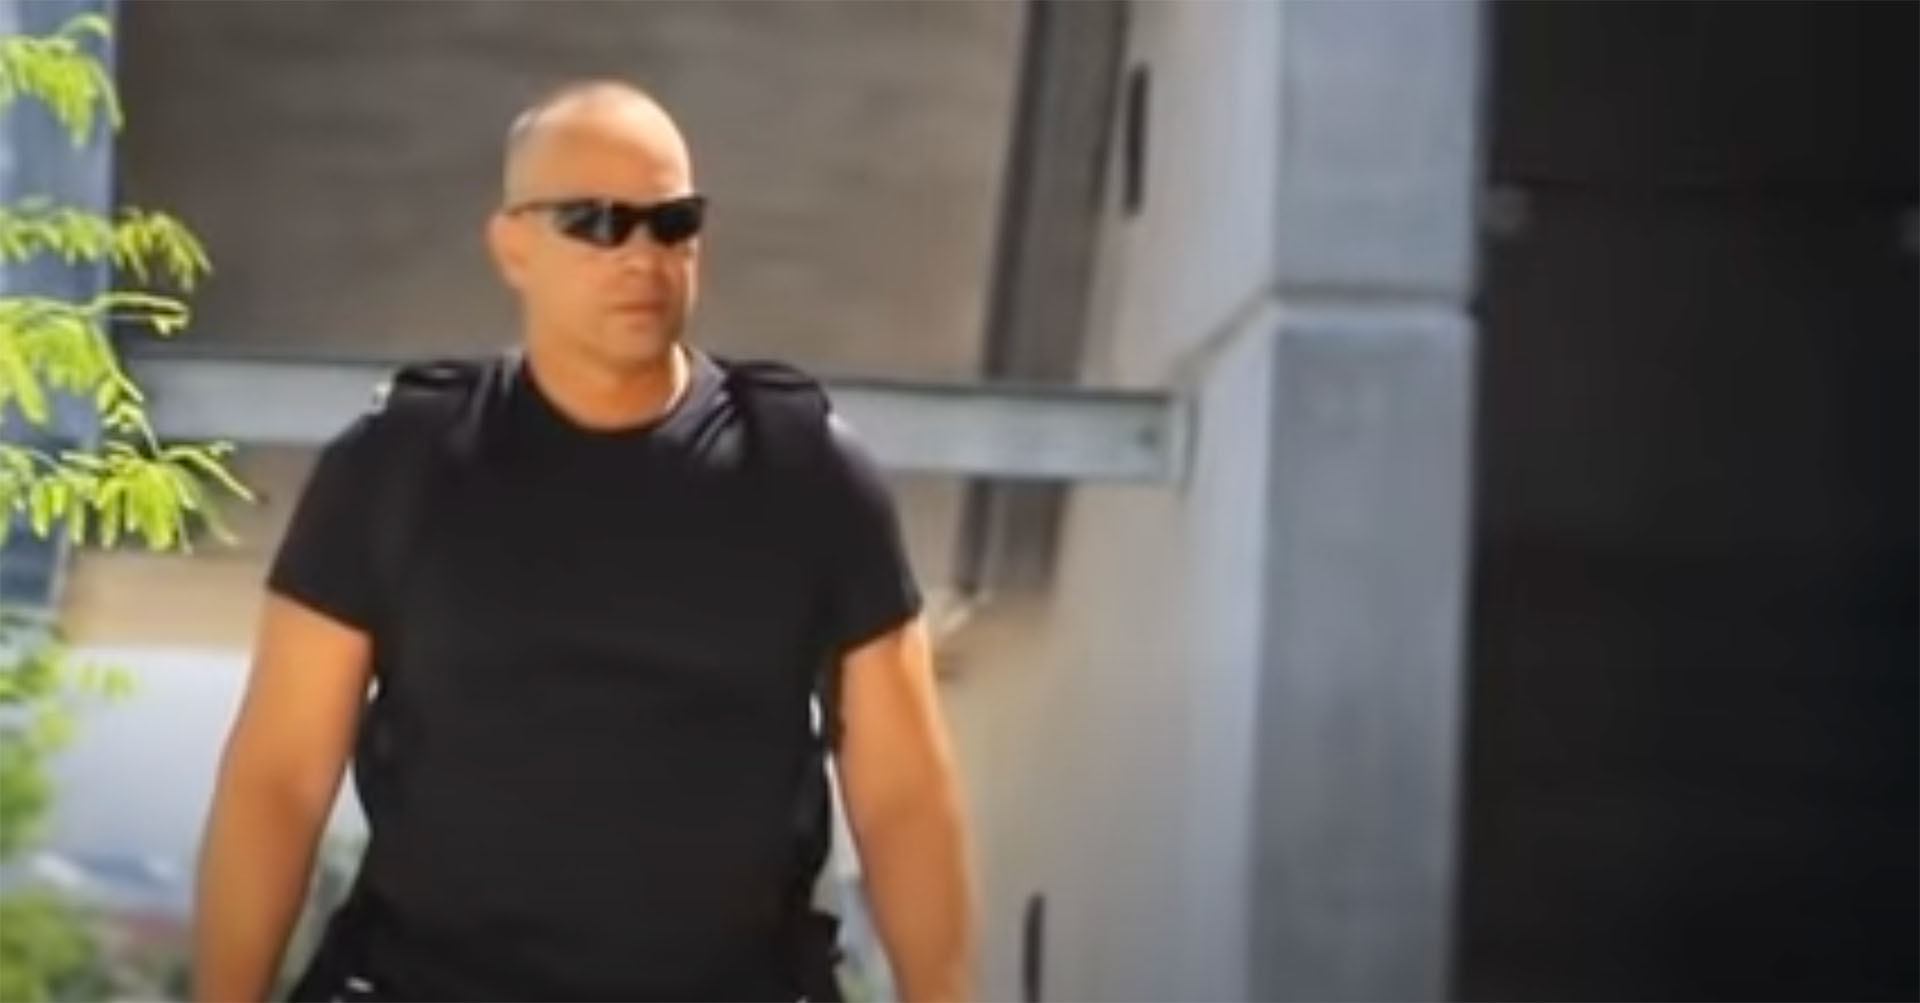 Active shooter training video screen grab